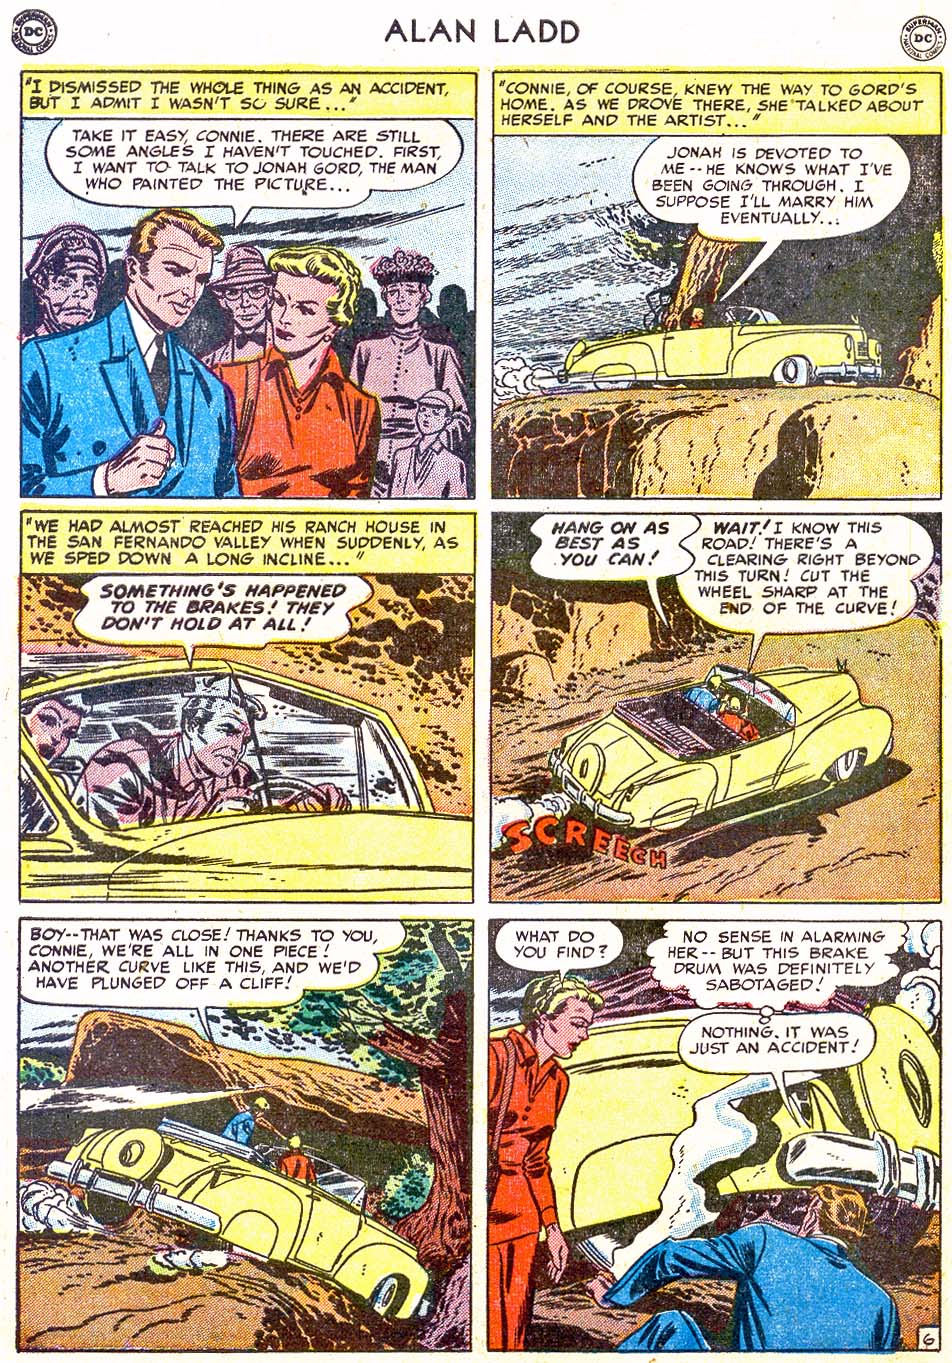 Read online Adventures of Alan Ladd comic -  Issue #6 - 8